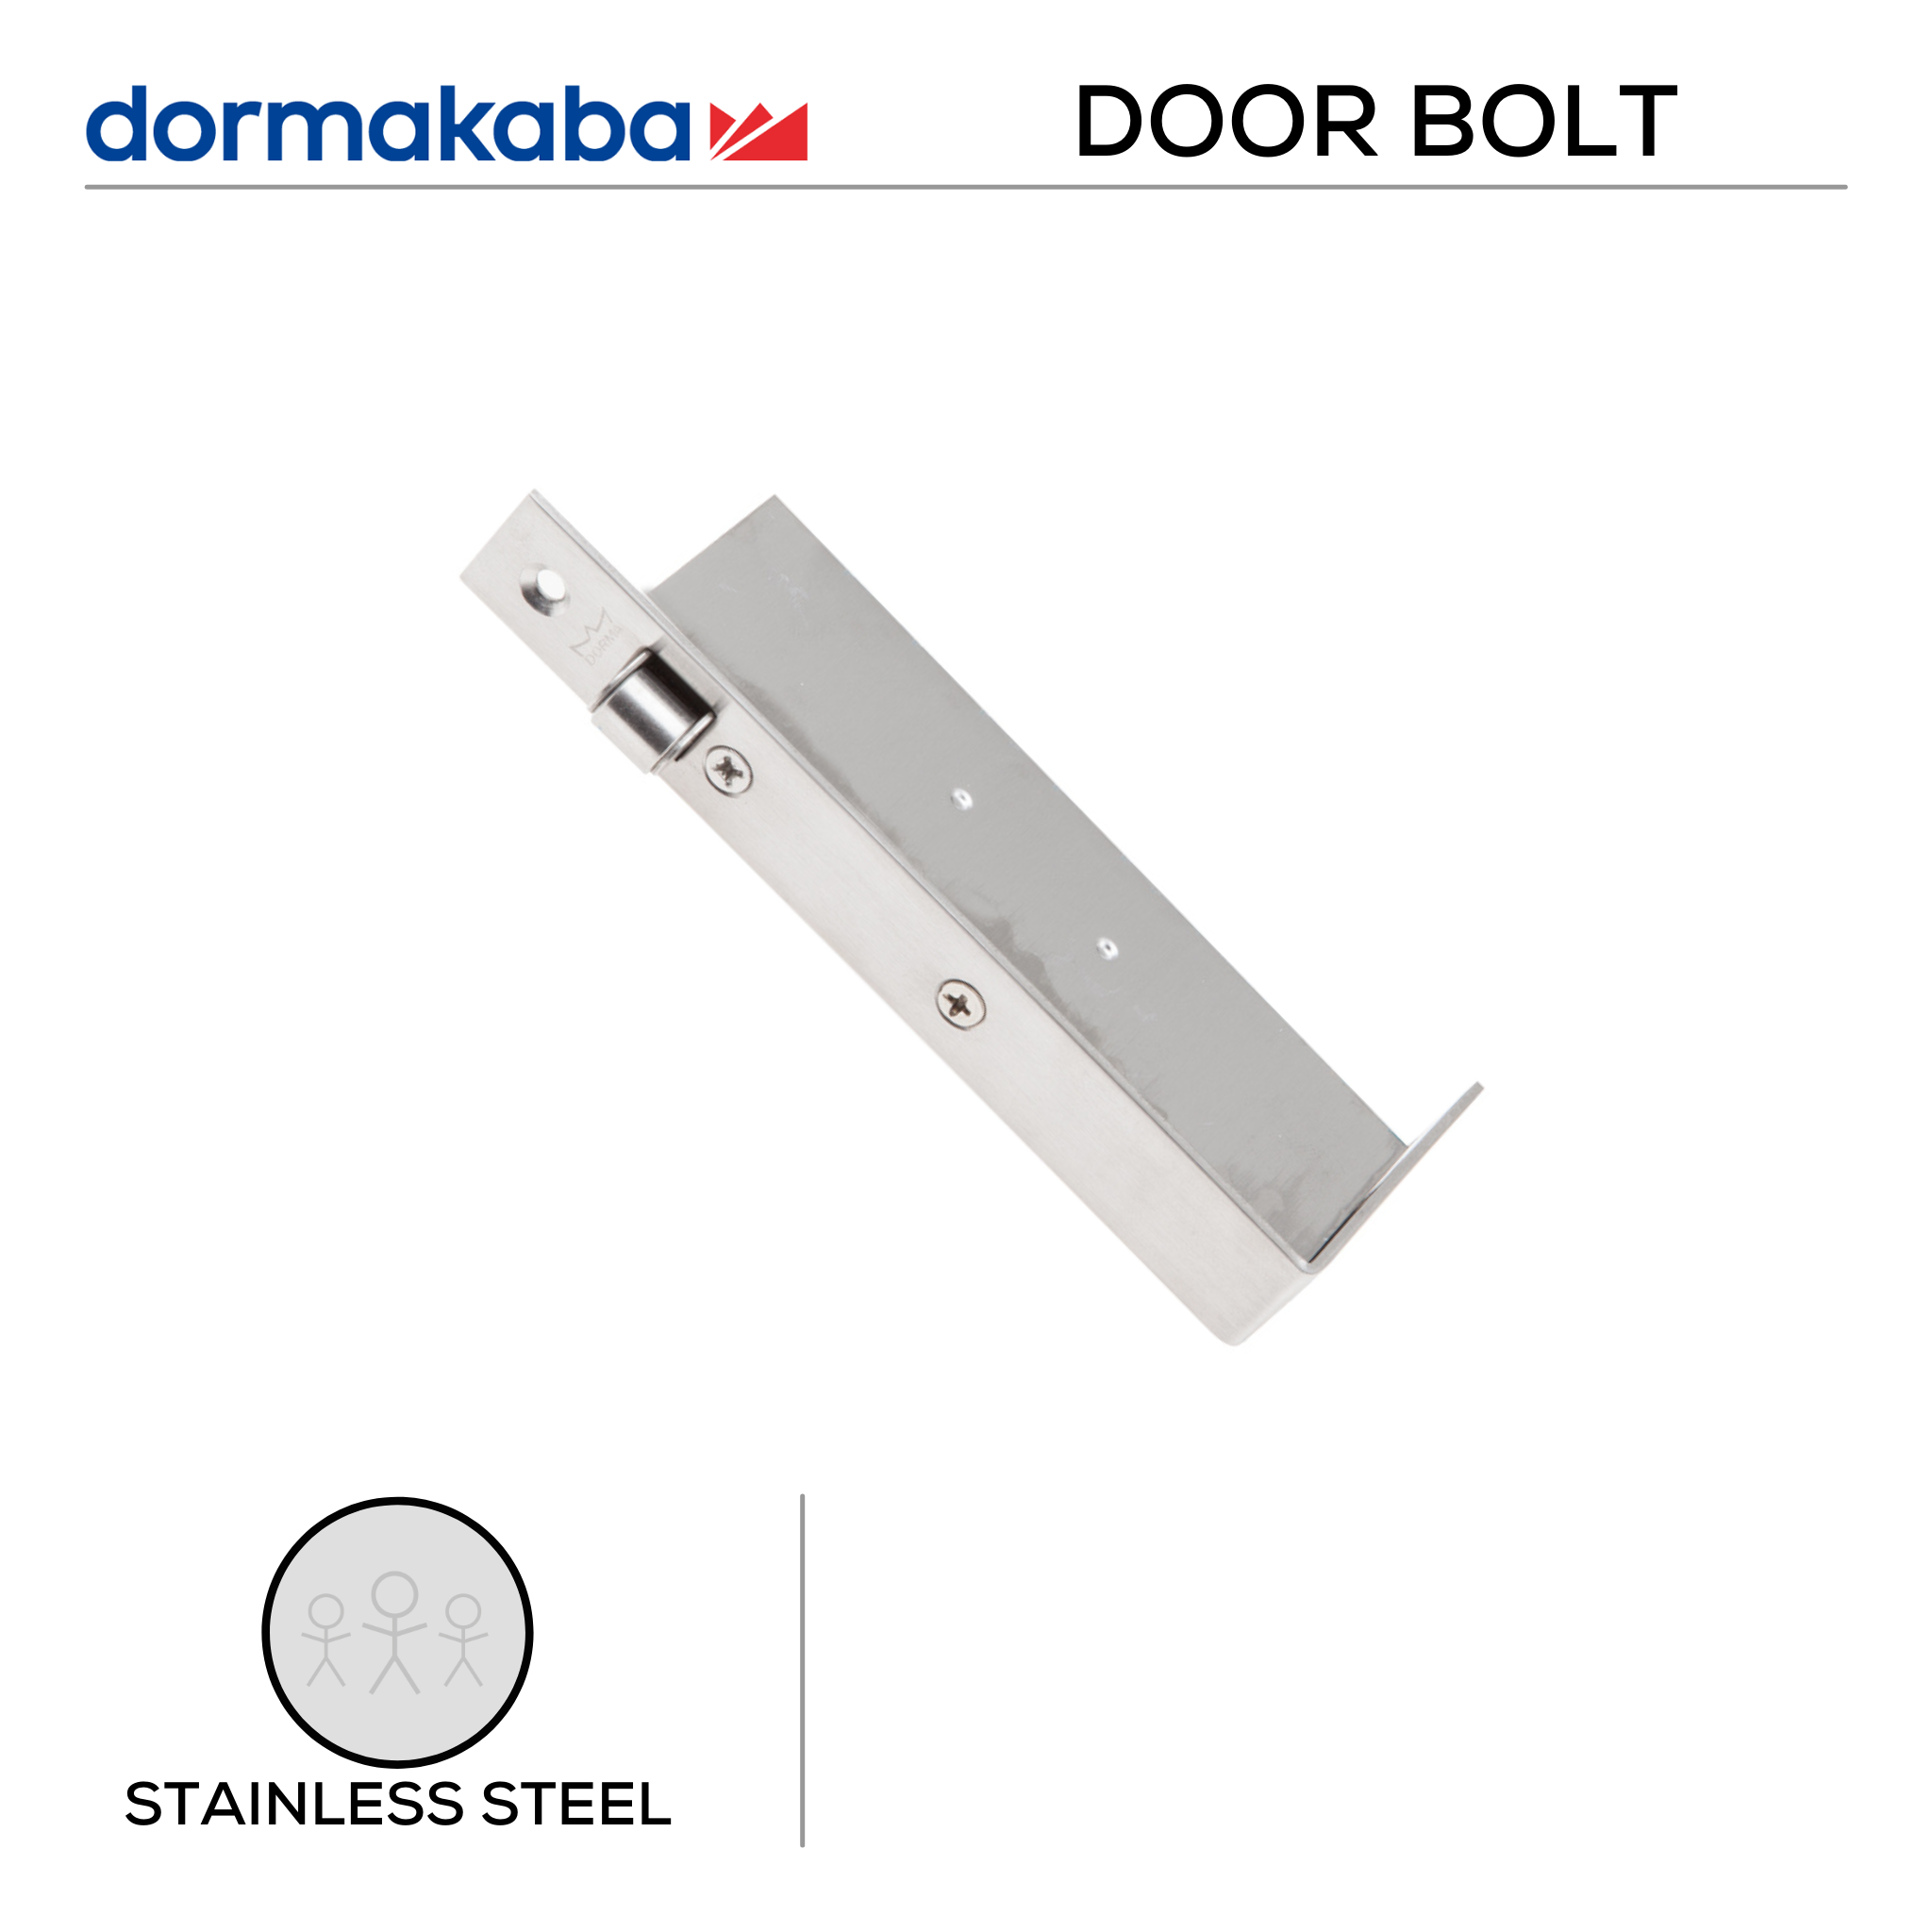 DAB-SS-019, Flush Bolt, Automatic, Straight, 147mm (l) x 55mm (w) x 20mm (t), Stainless Steel, DORMAKABA